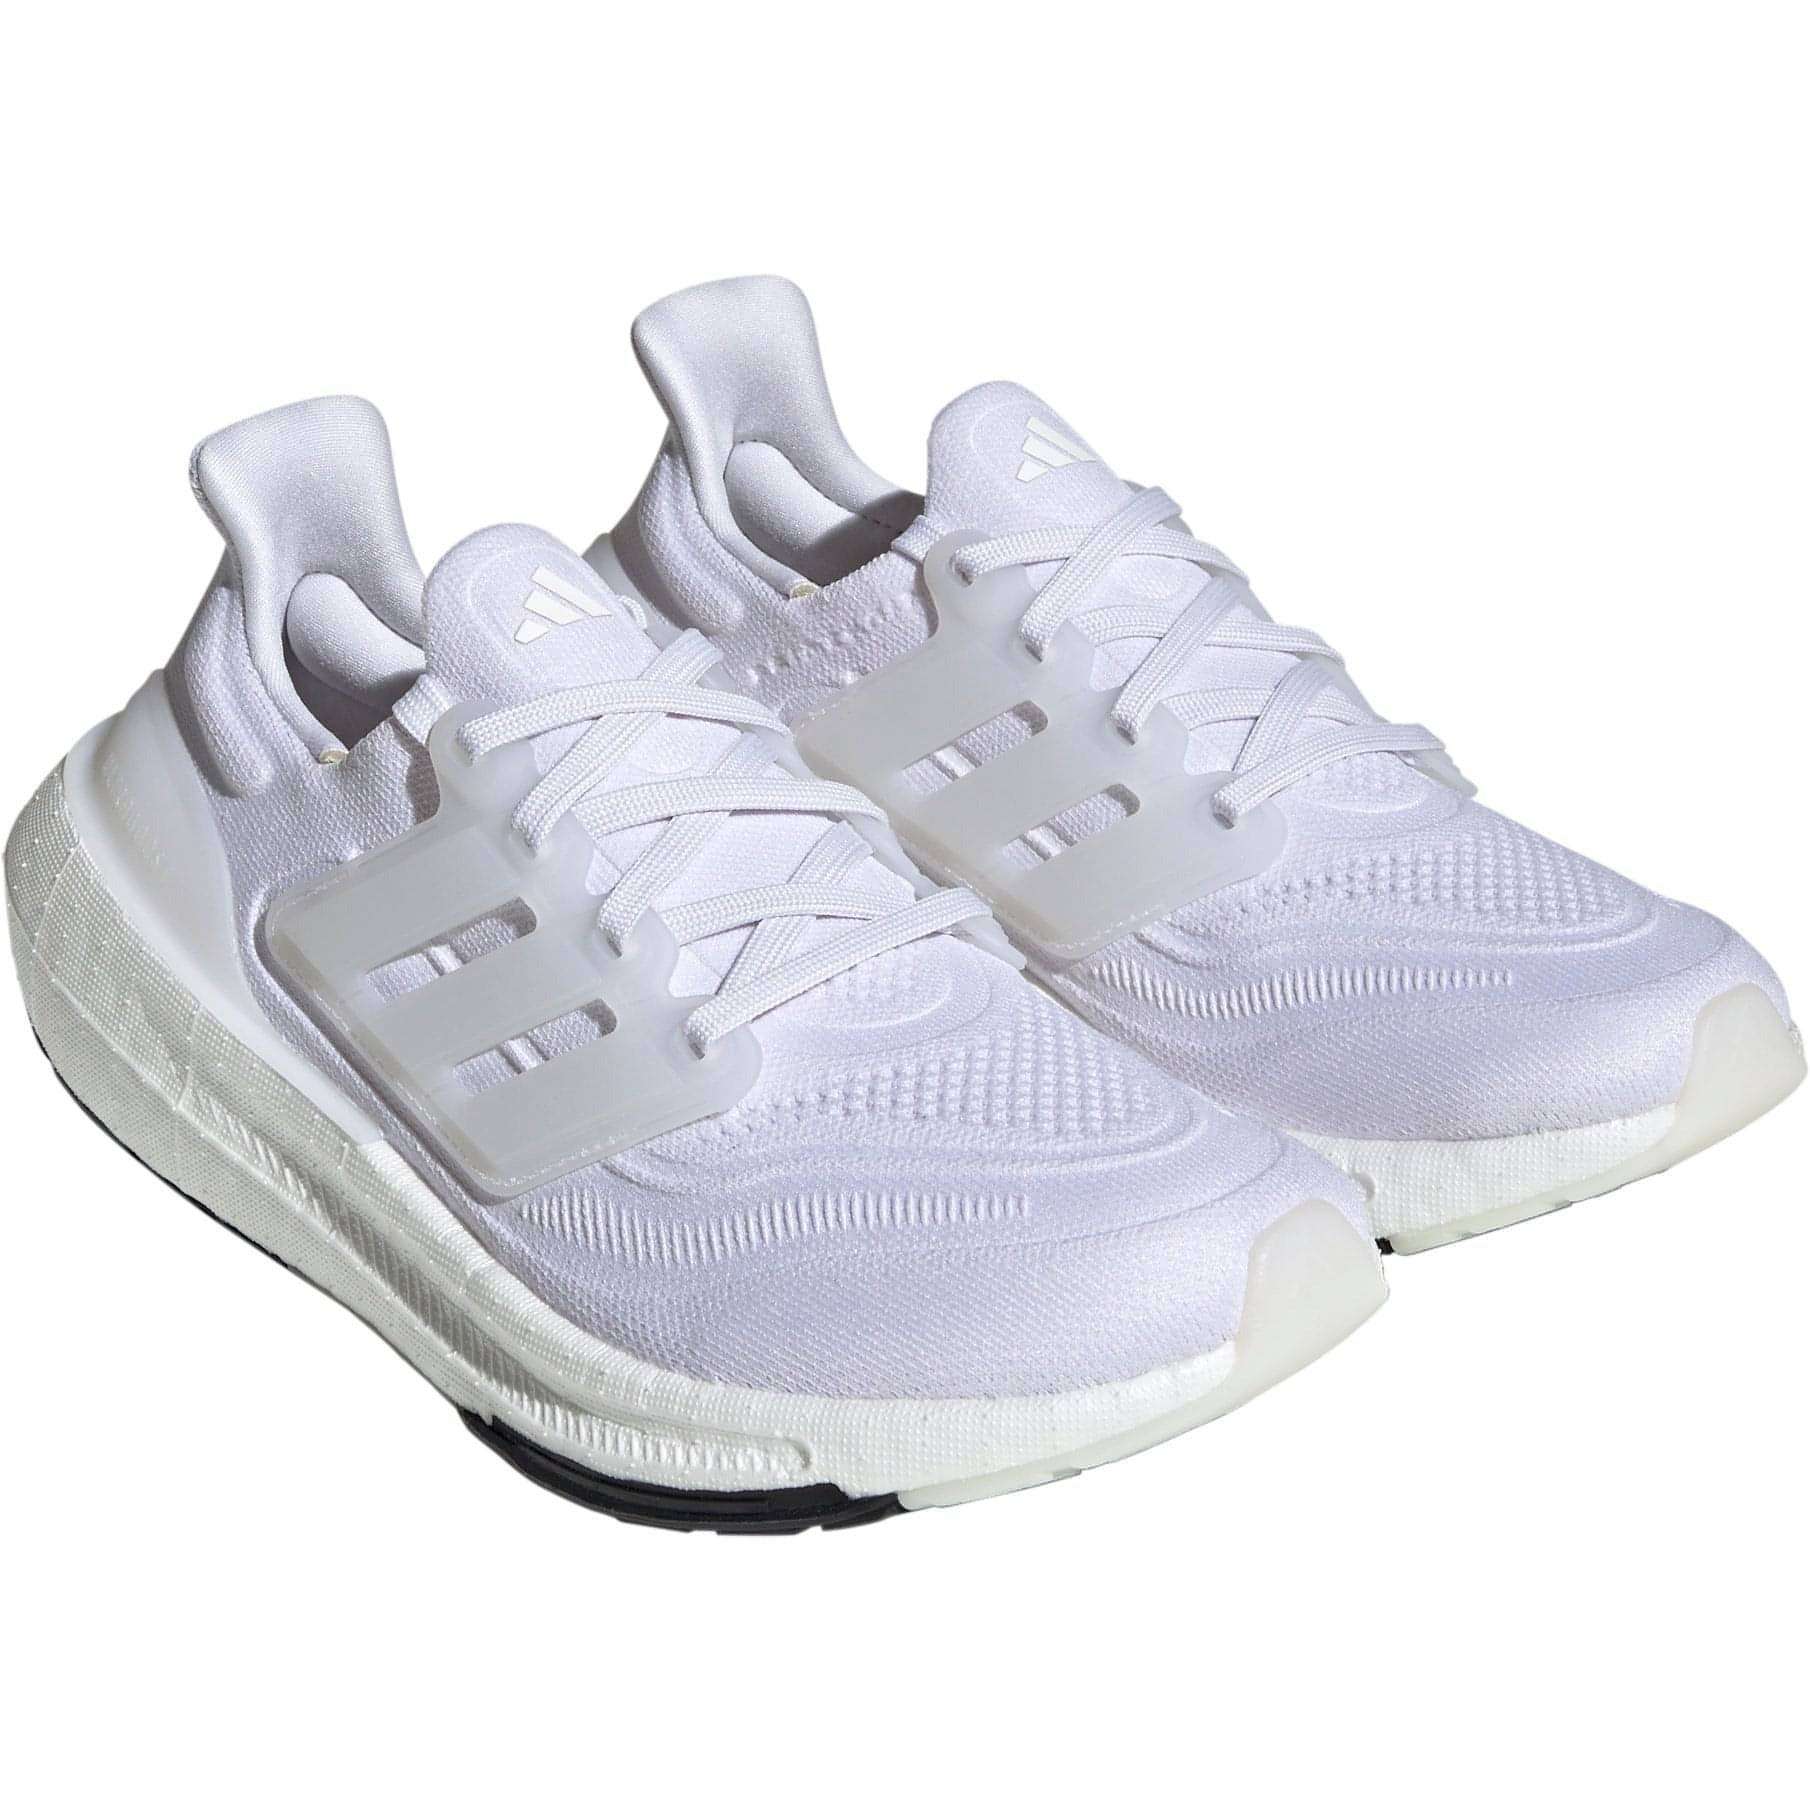 Adidas Ultra Boost Light Gy9352 Front - Front View